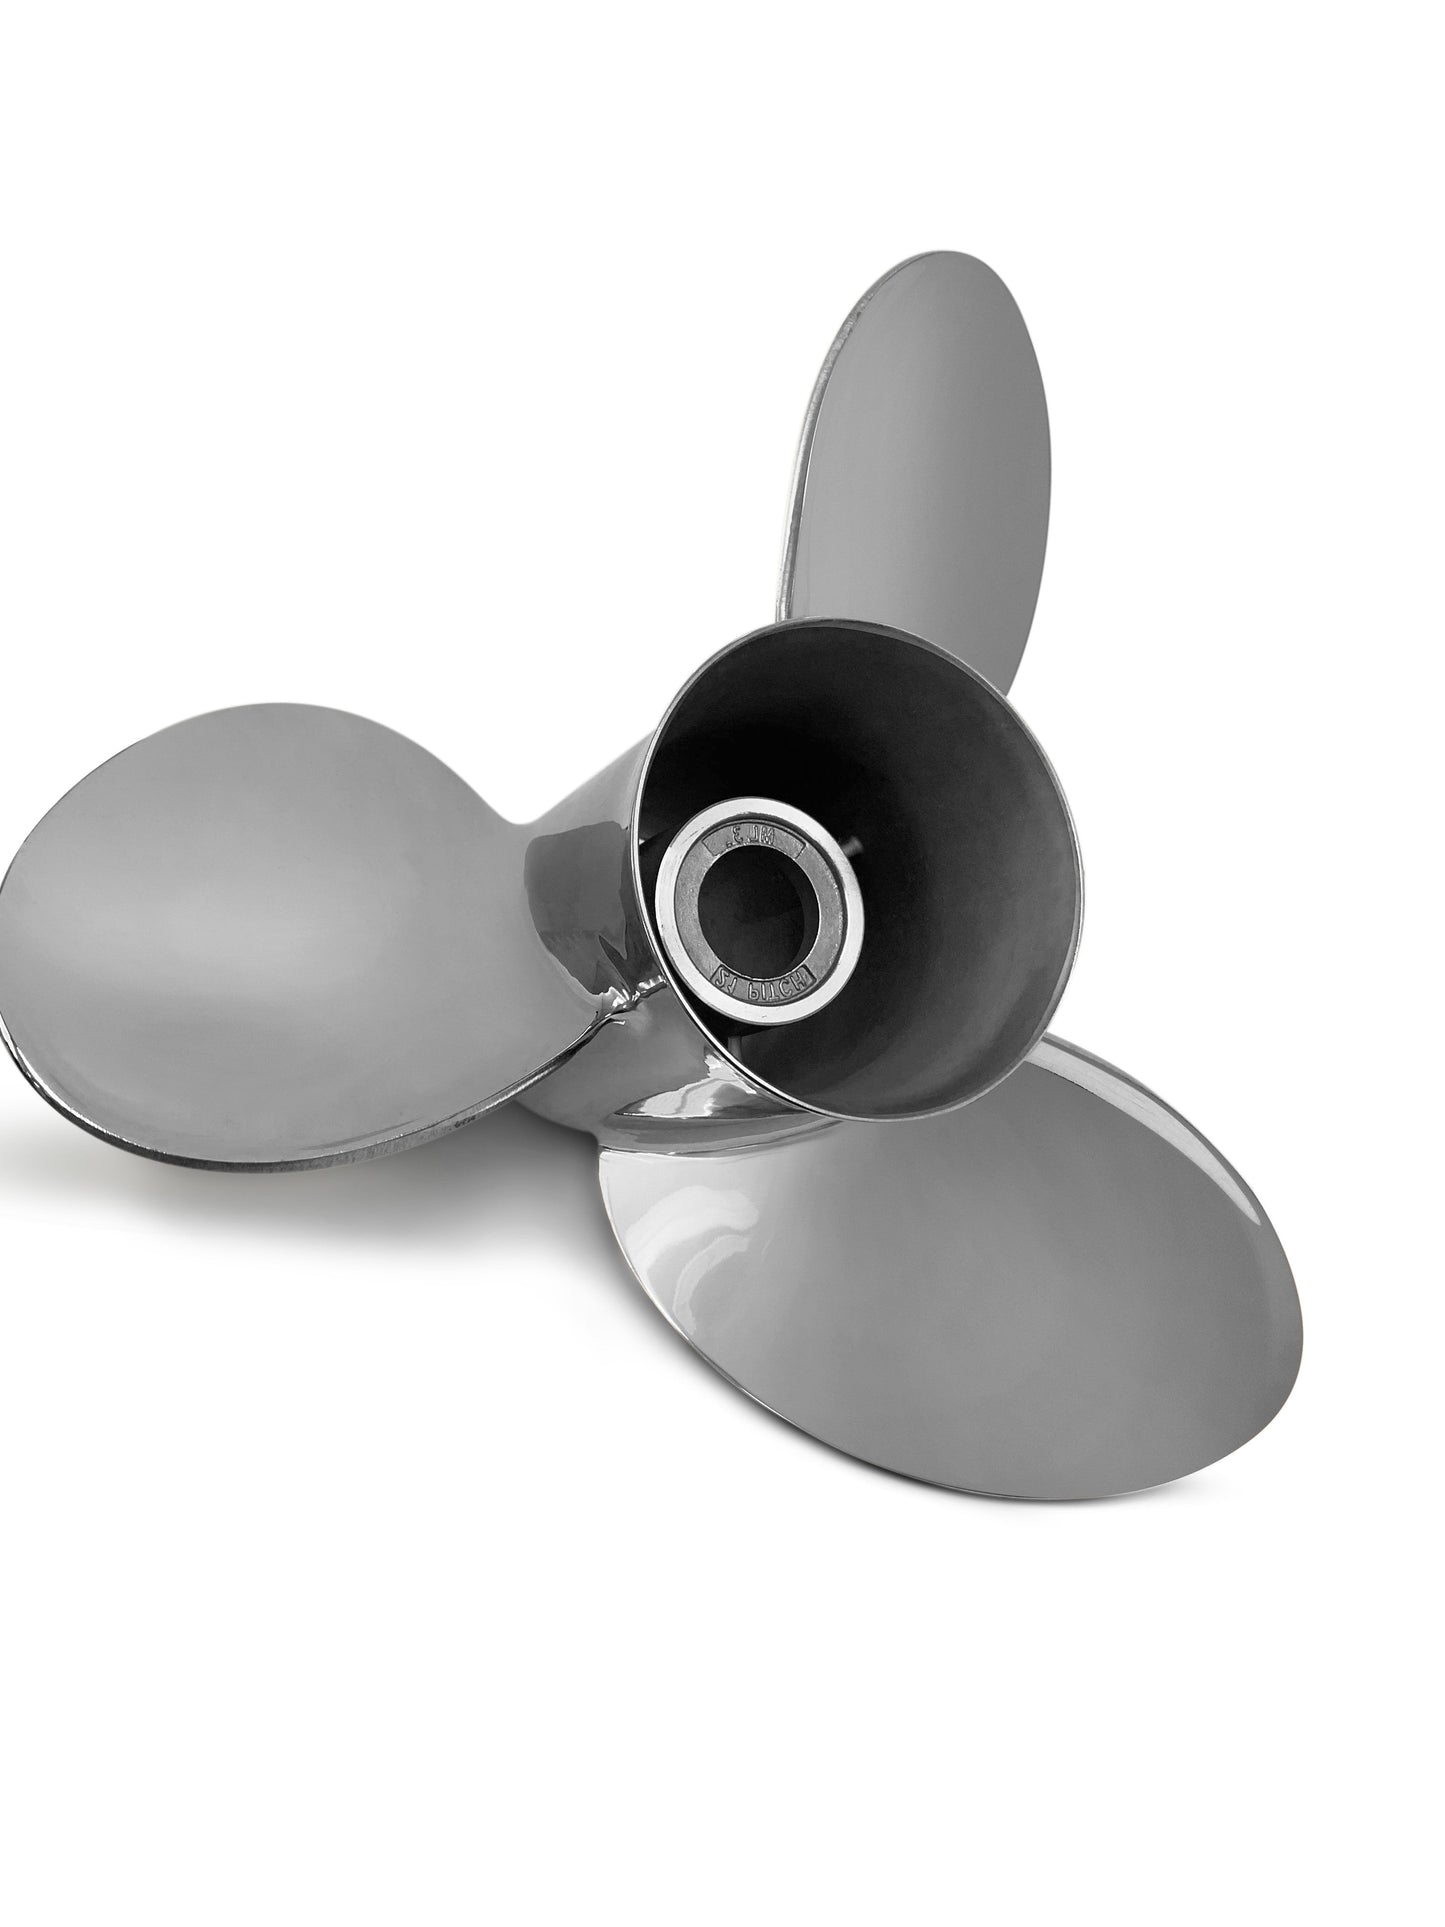 ML3 Three Blade Propeller For Mercury Outboard